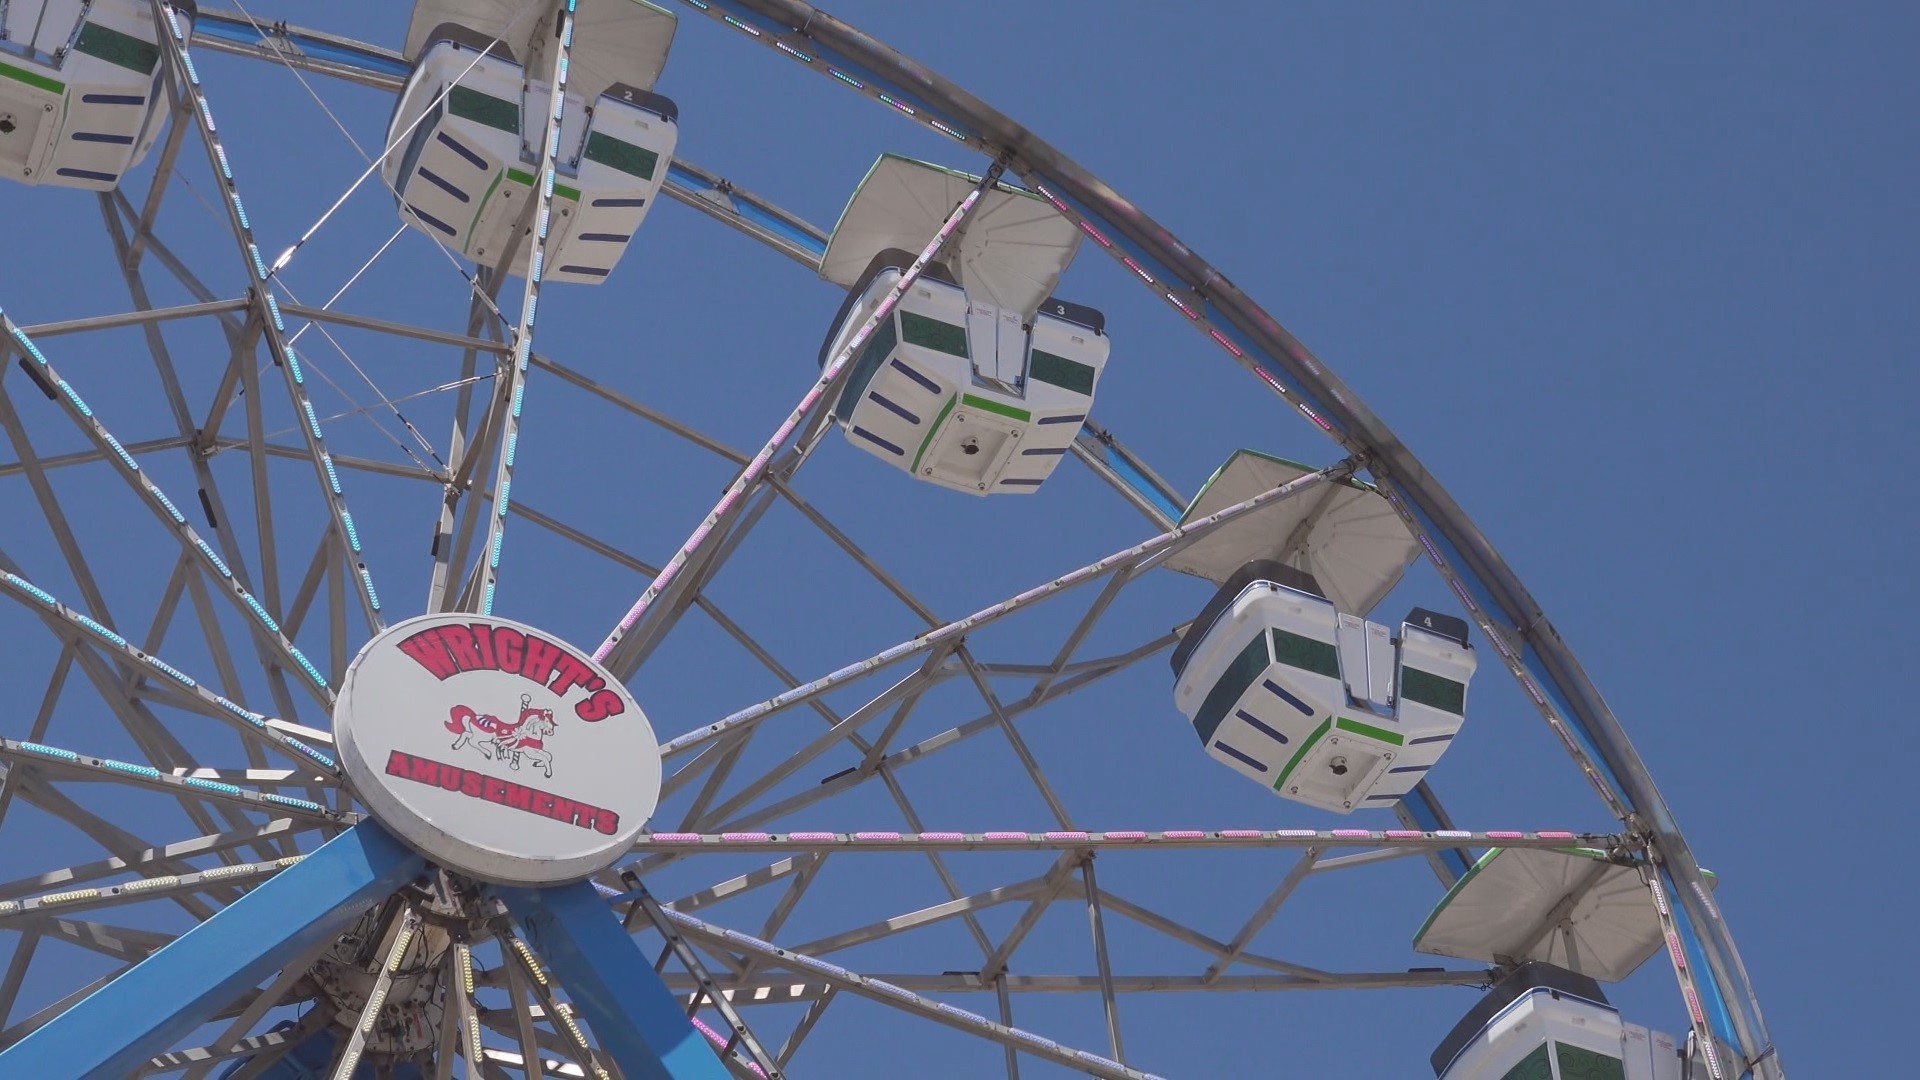 After a year-long hiatus, the fair is returning to West Texas.